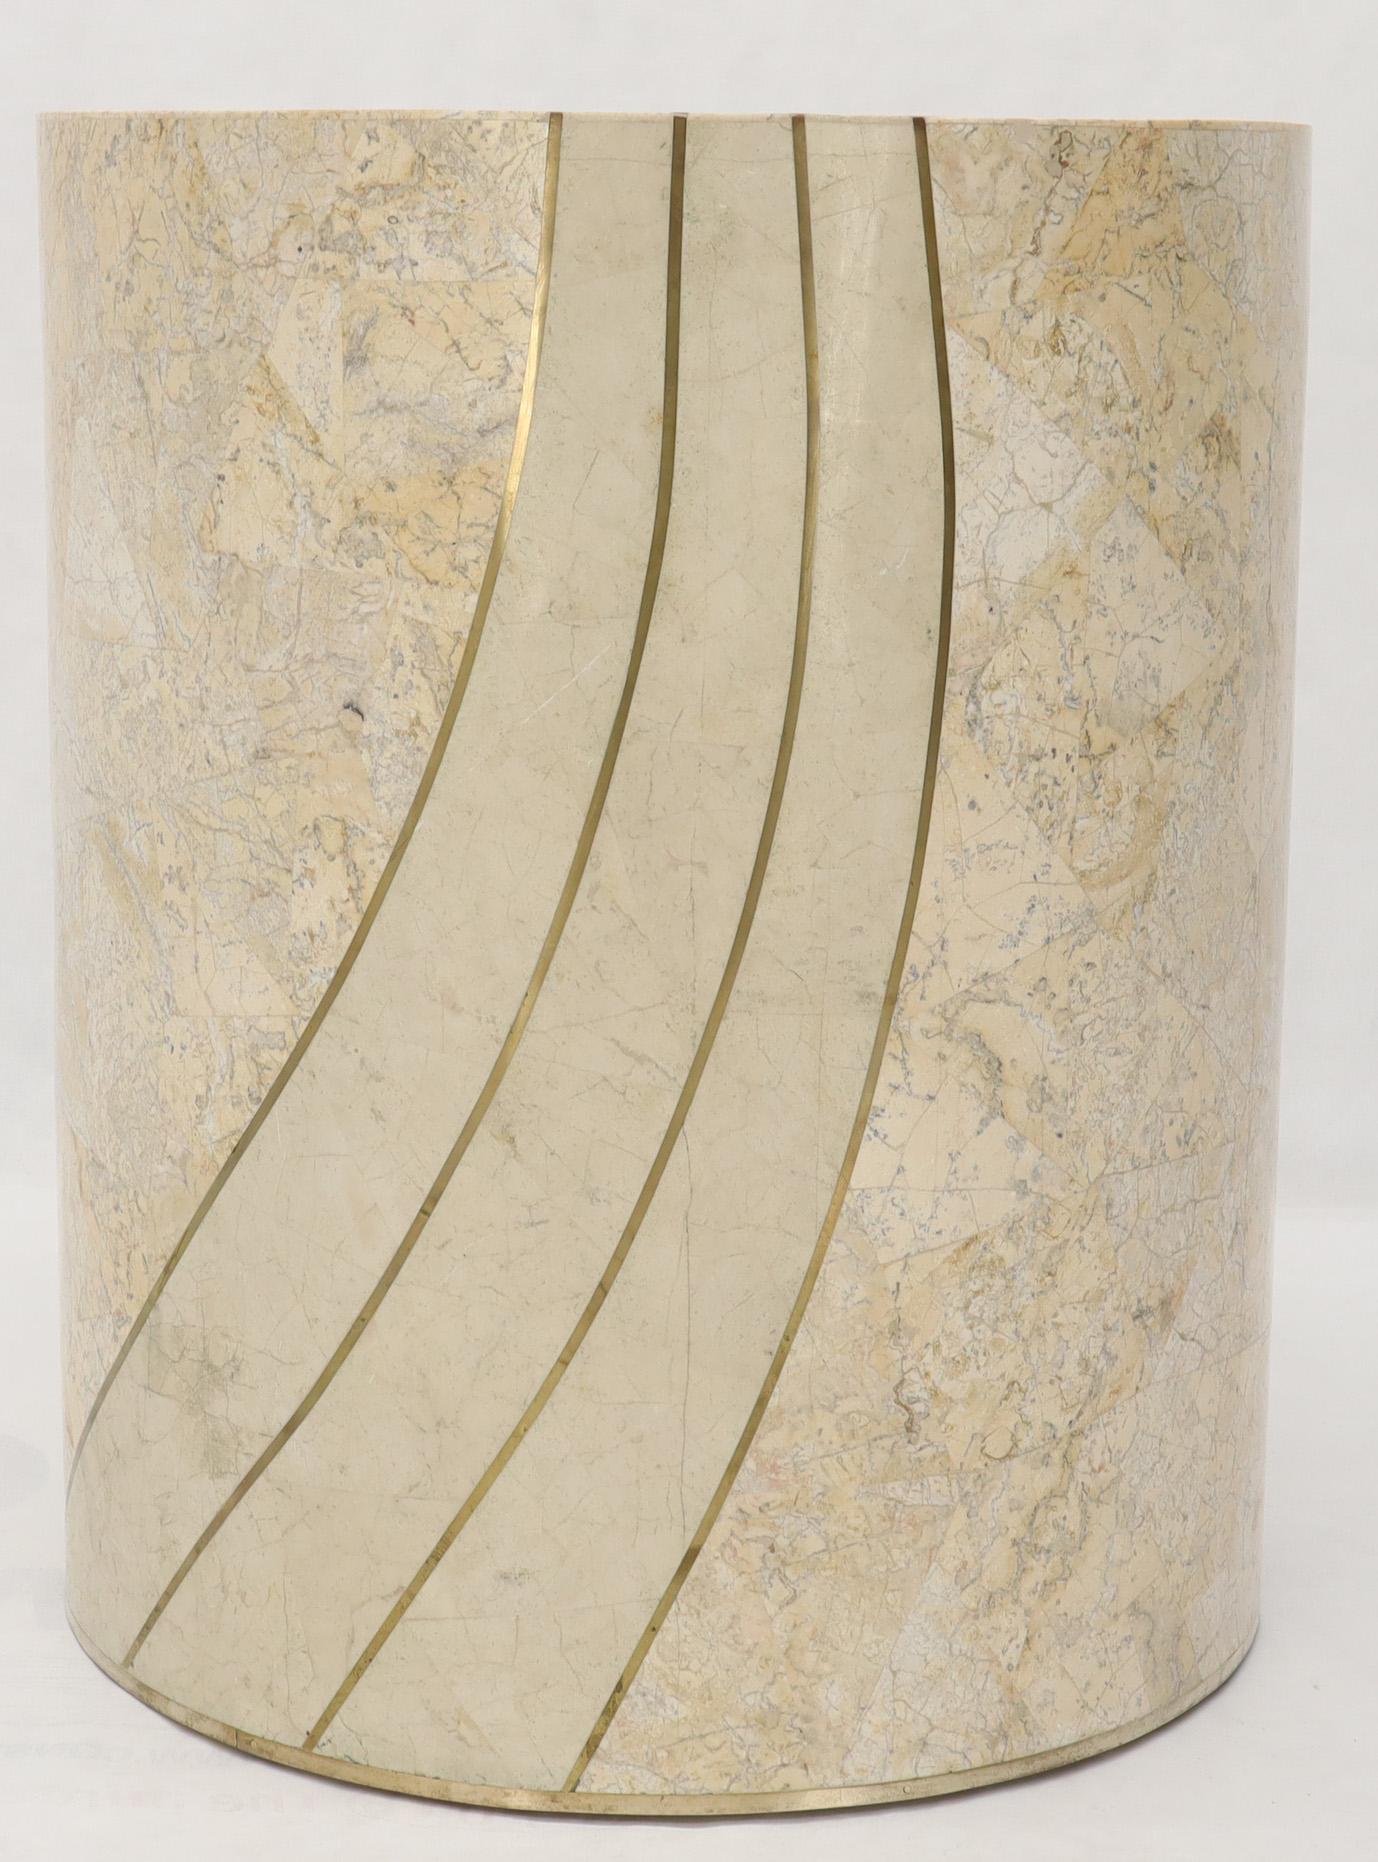 Attributed to Maintland-Smith Mid-Century Modern tessellated stone round dining table base pedestal.